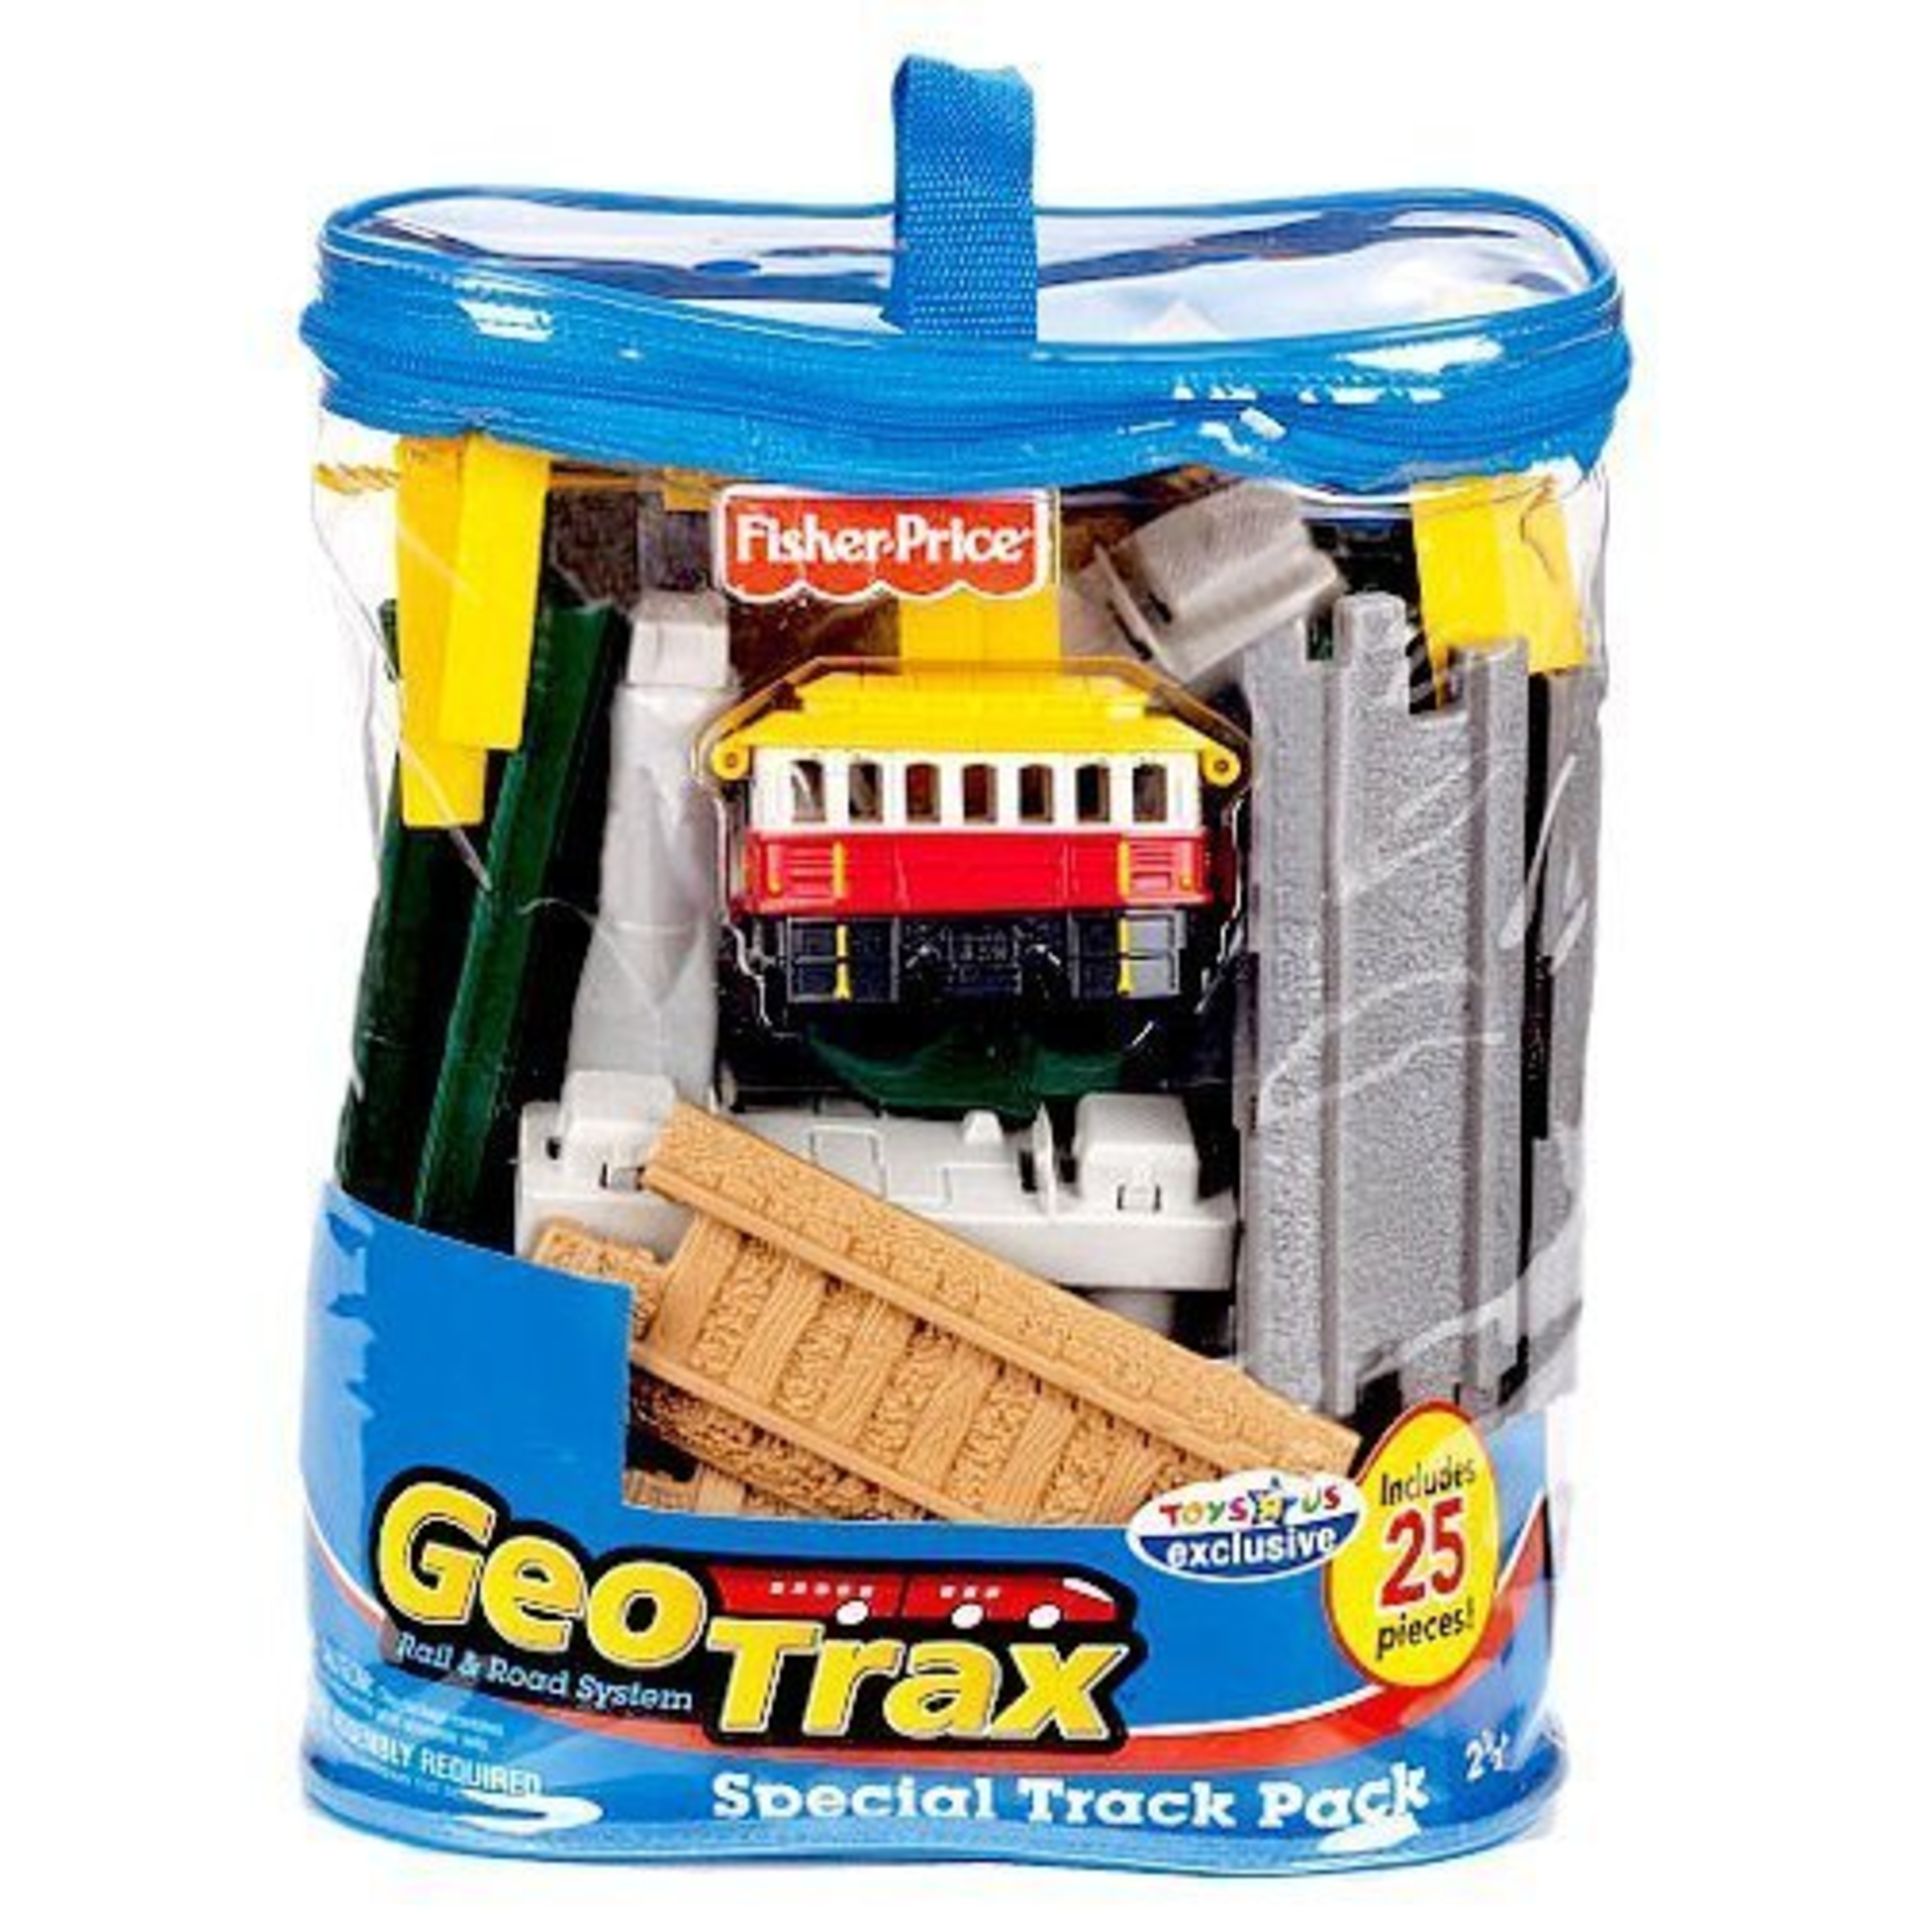 V *TRADE QTY* Grade A Fisher-Price GeoTrax Special Track Pack incl. 25 Pieces In Carry Case RRP £